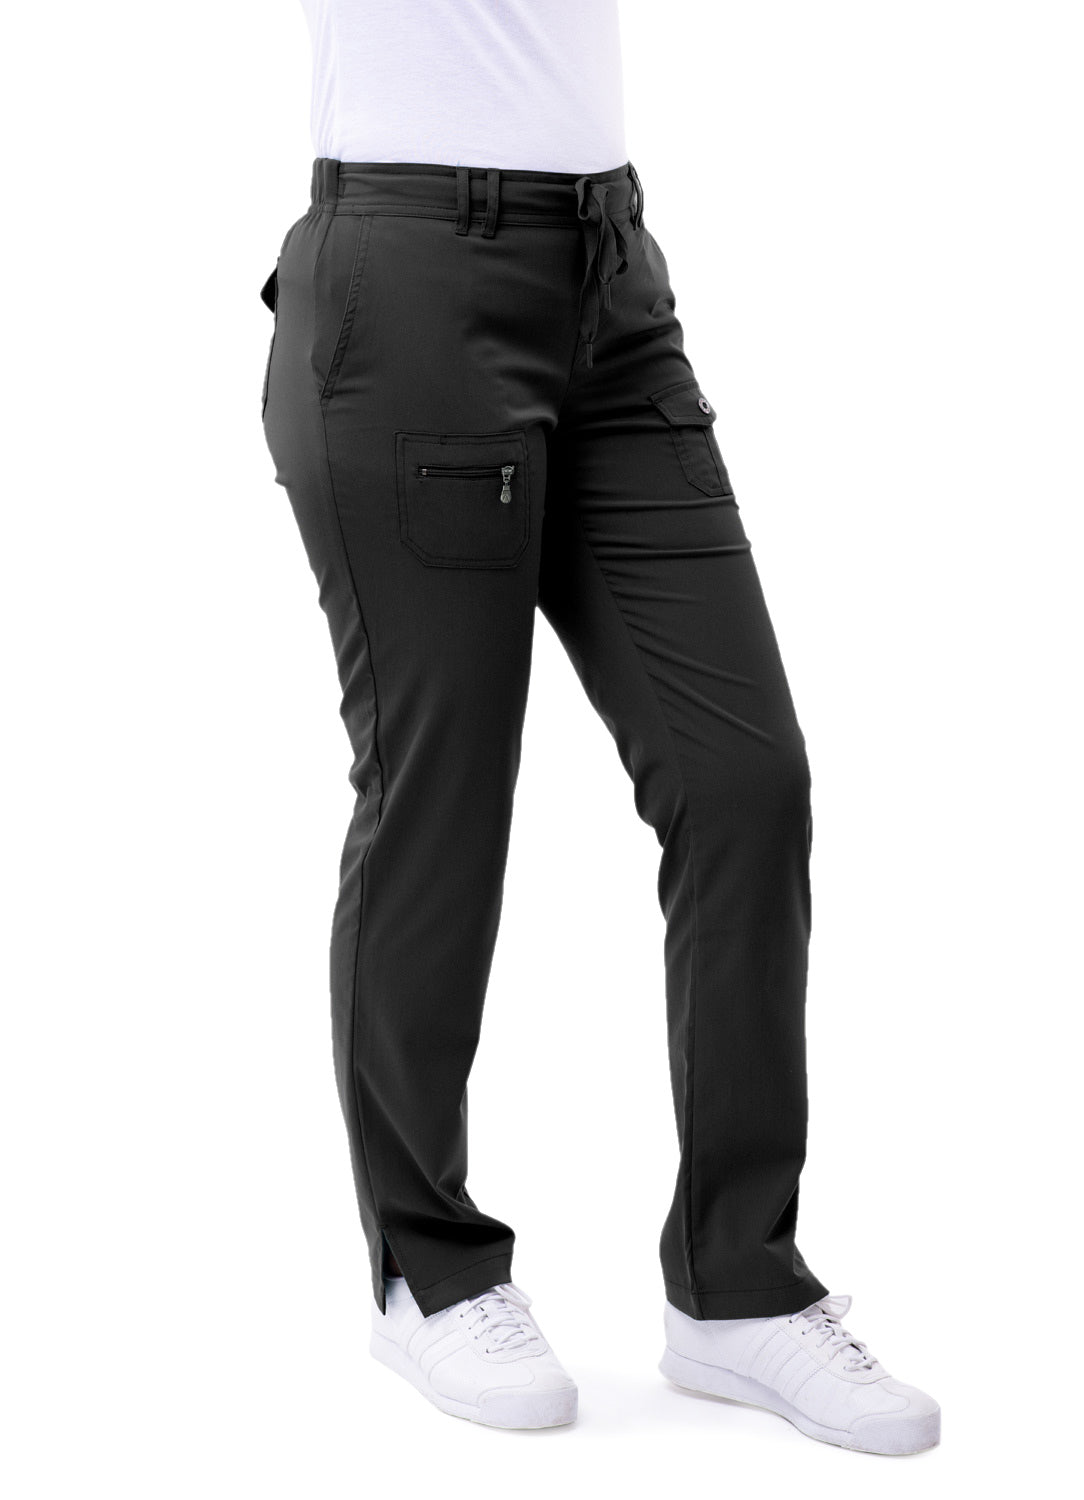 Women's Slim Fit 6 Pocket Pant PRO COLLECTION- TALL – Scrubs